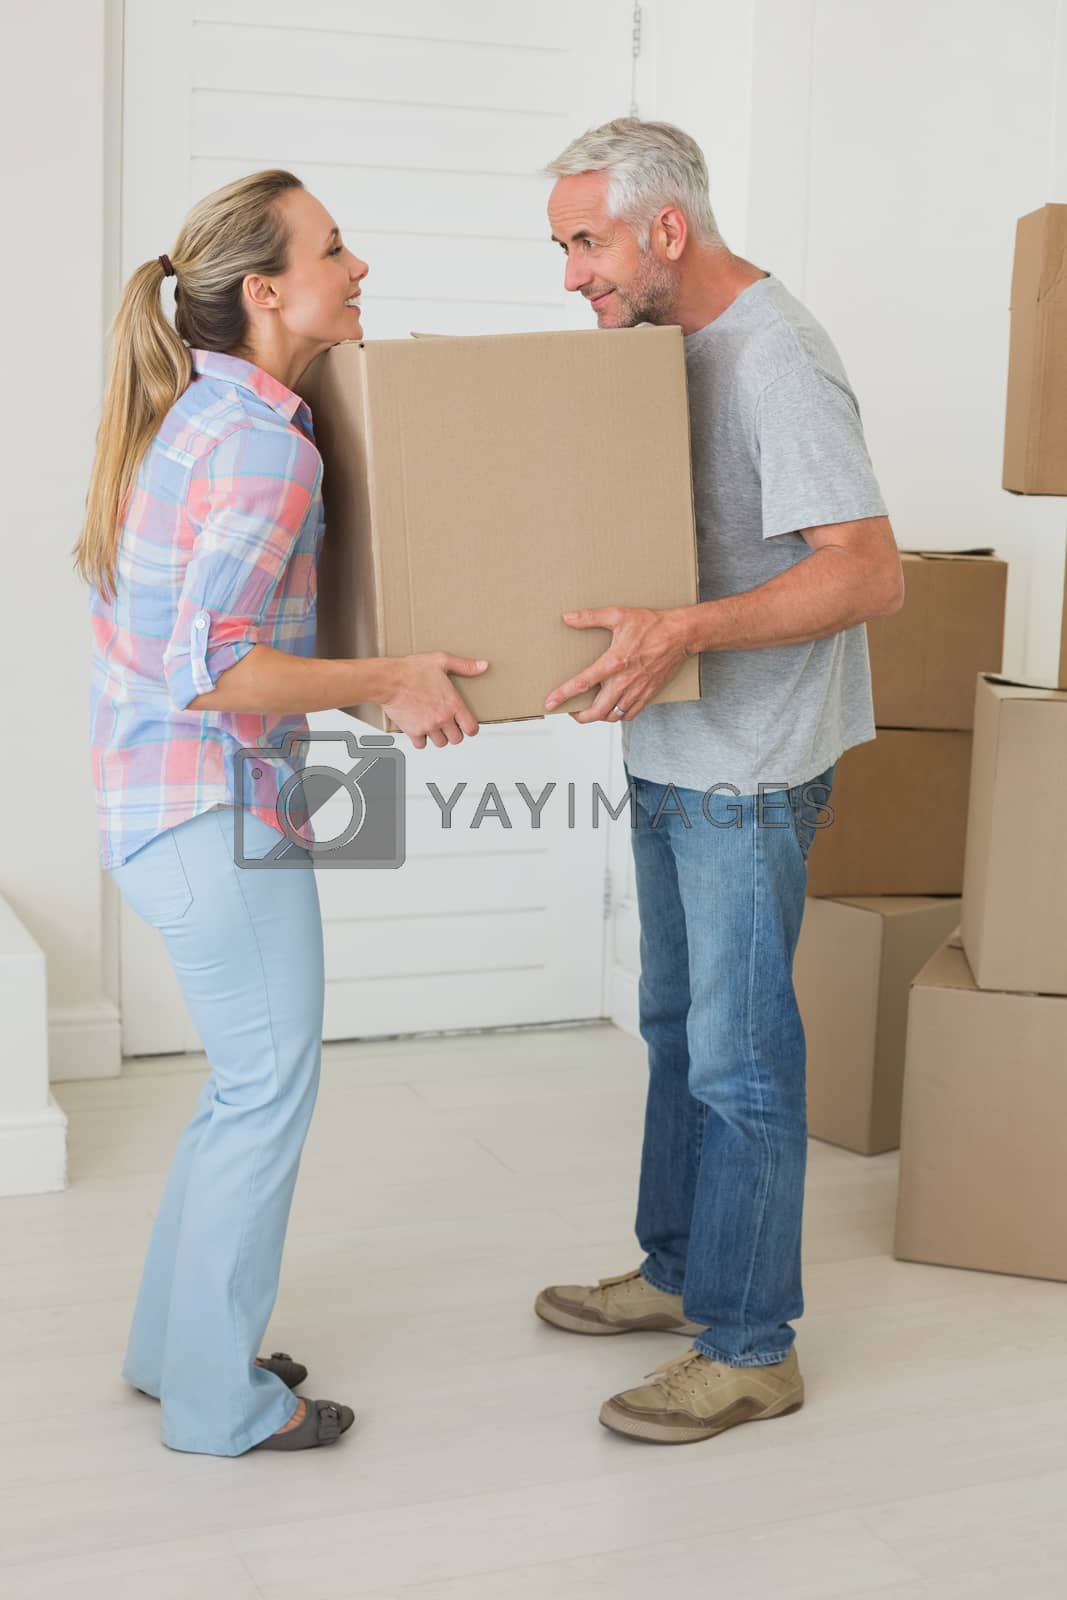 Royalty free image of Happy couple carrying cardboard moving boxes  by Wavebreakmedia